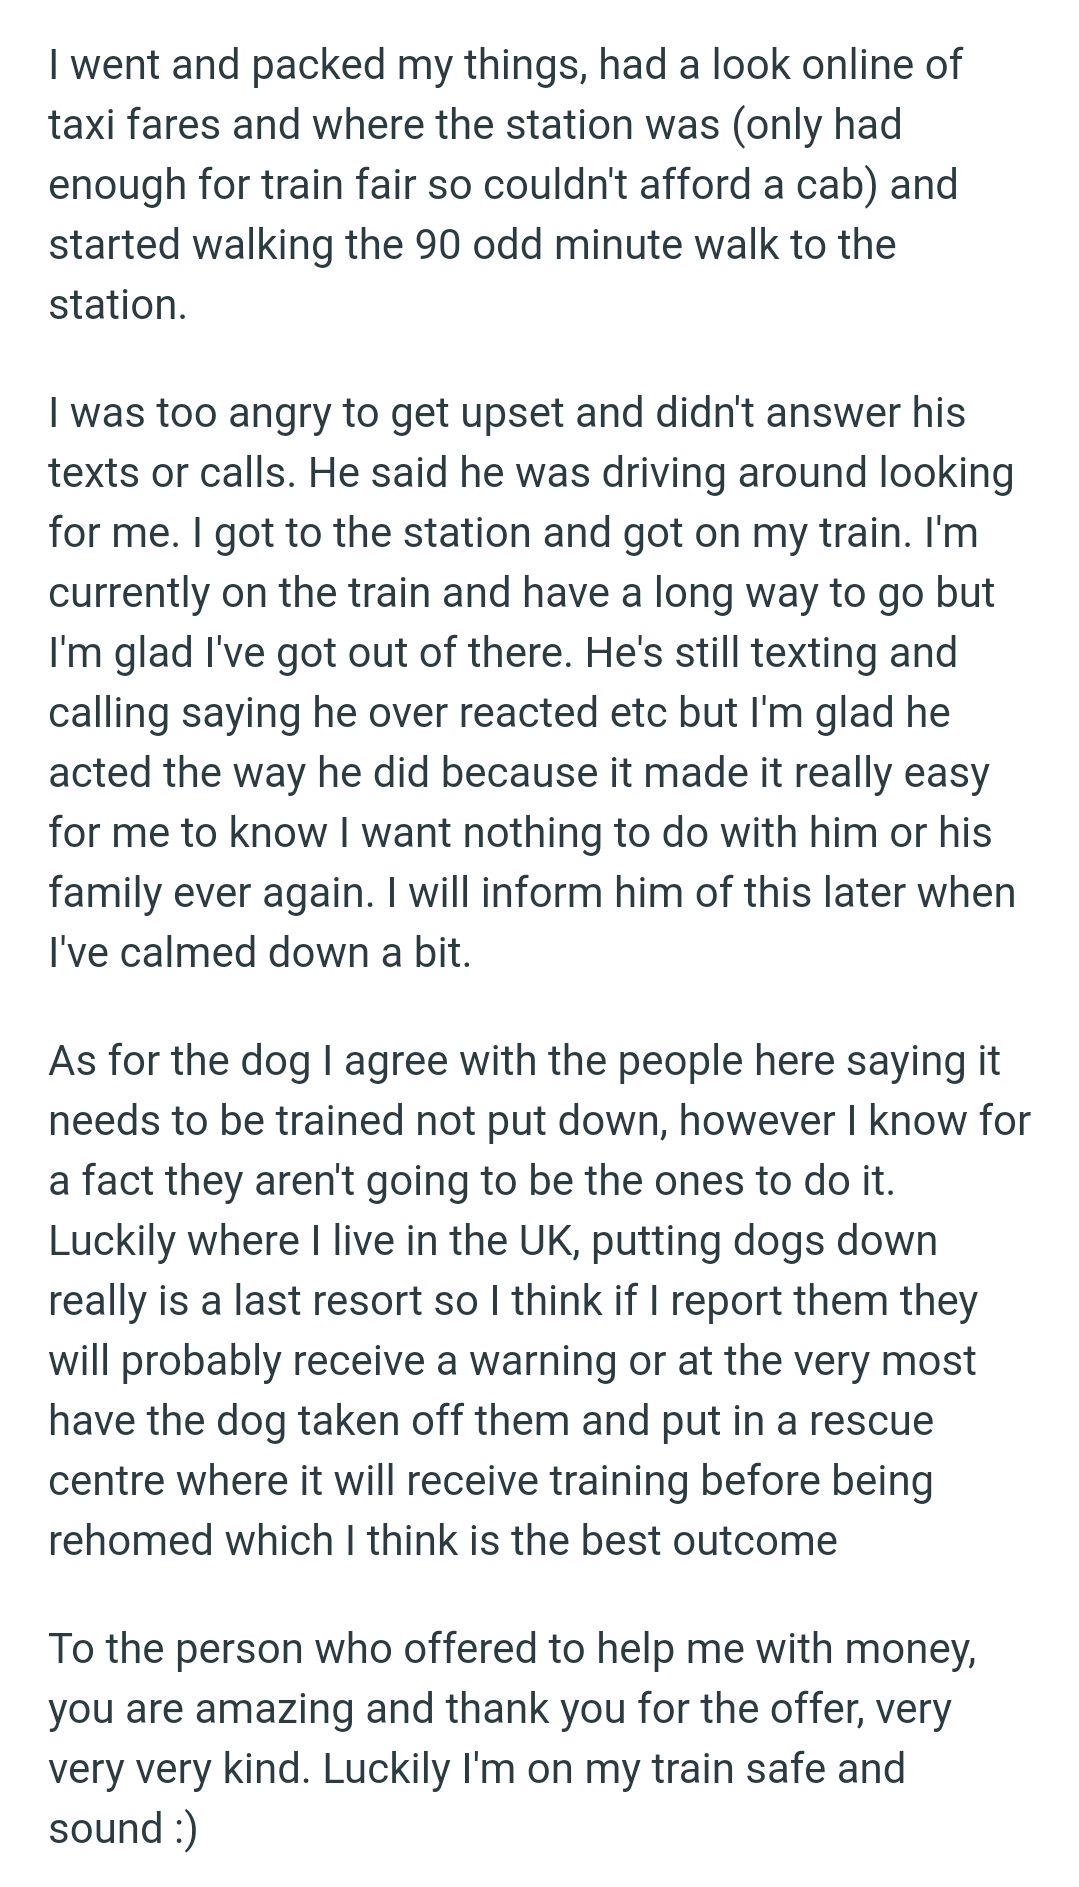 The OP thinks that if she reports them, they will probably receive a warning or at the very most have the dog taken off them